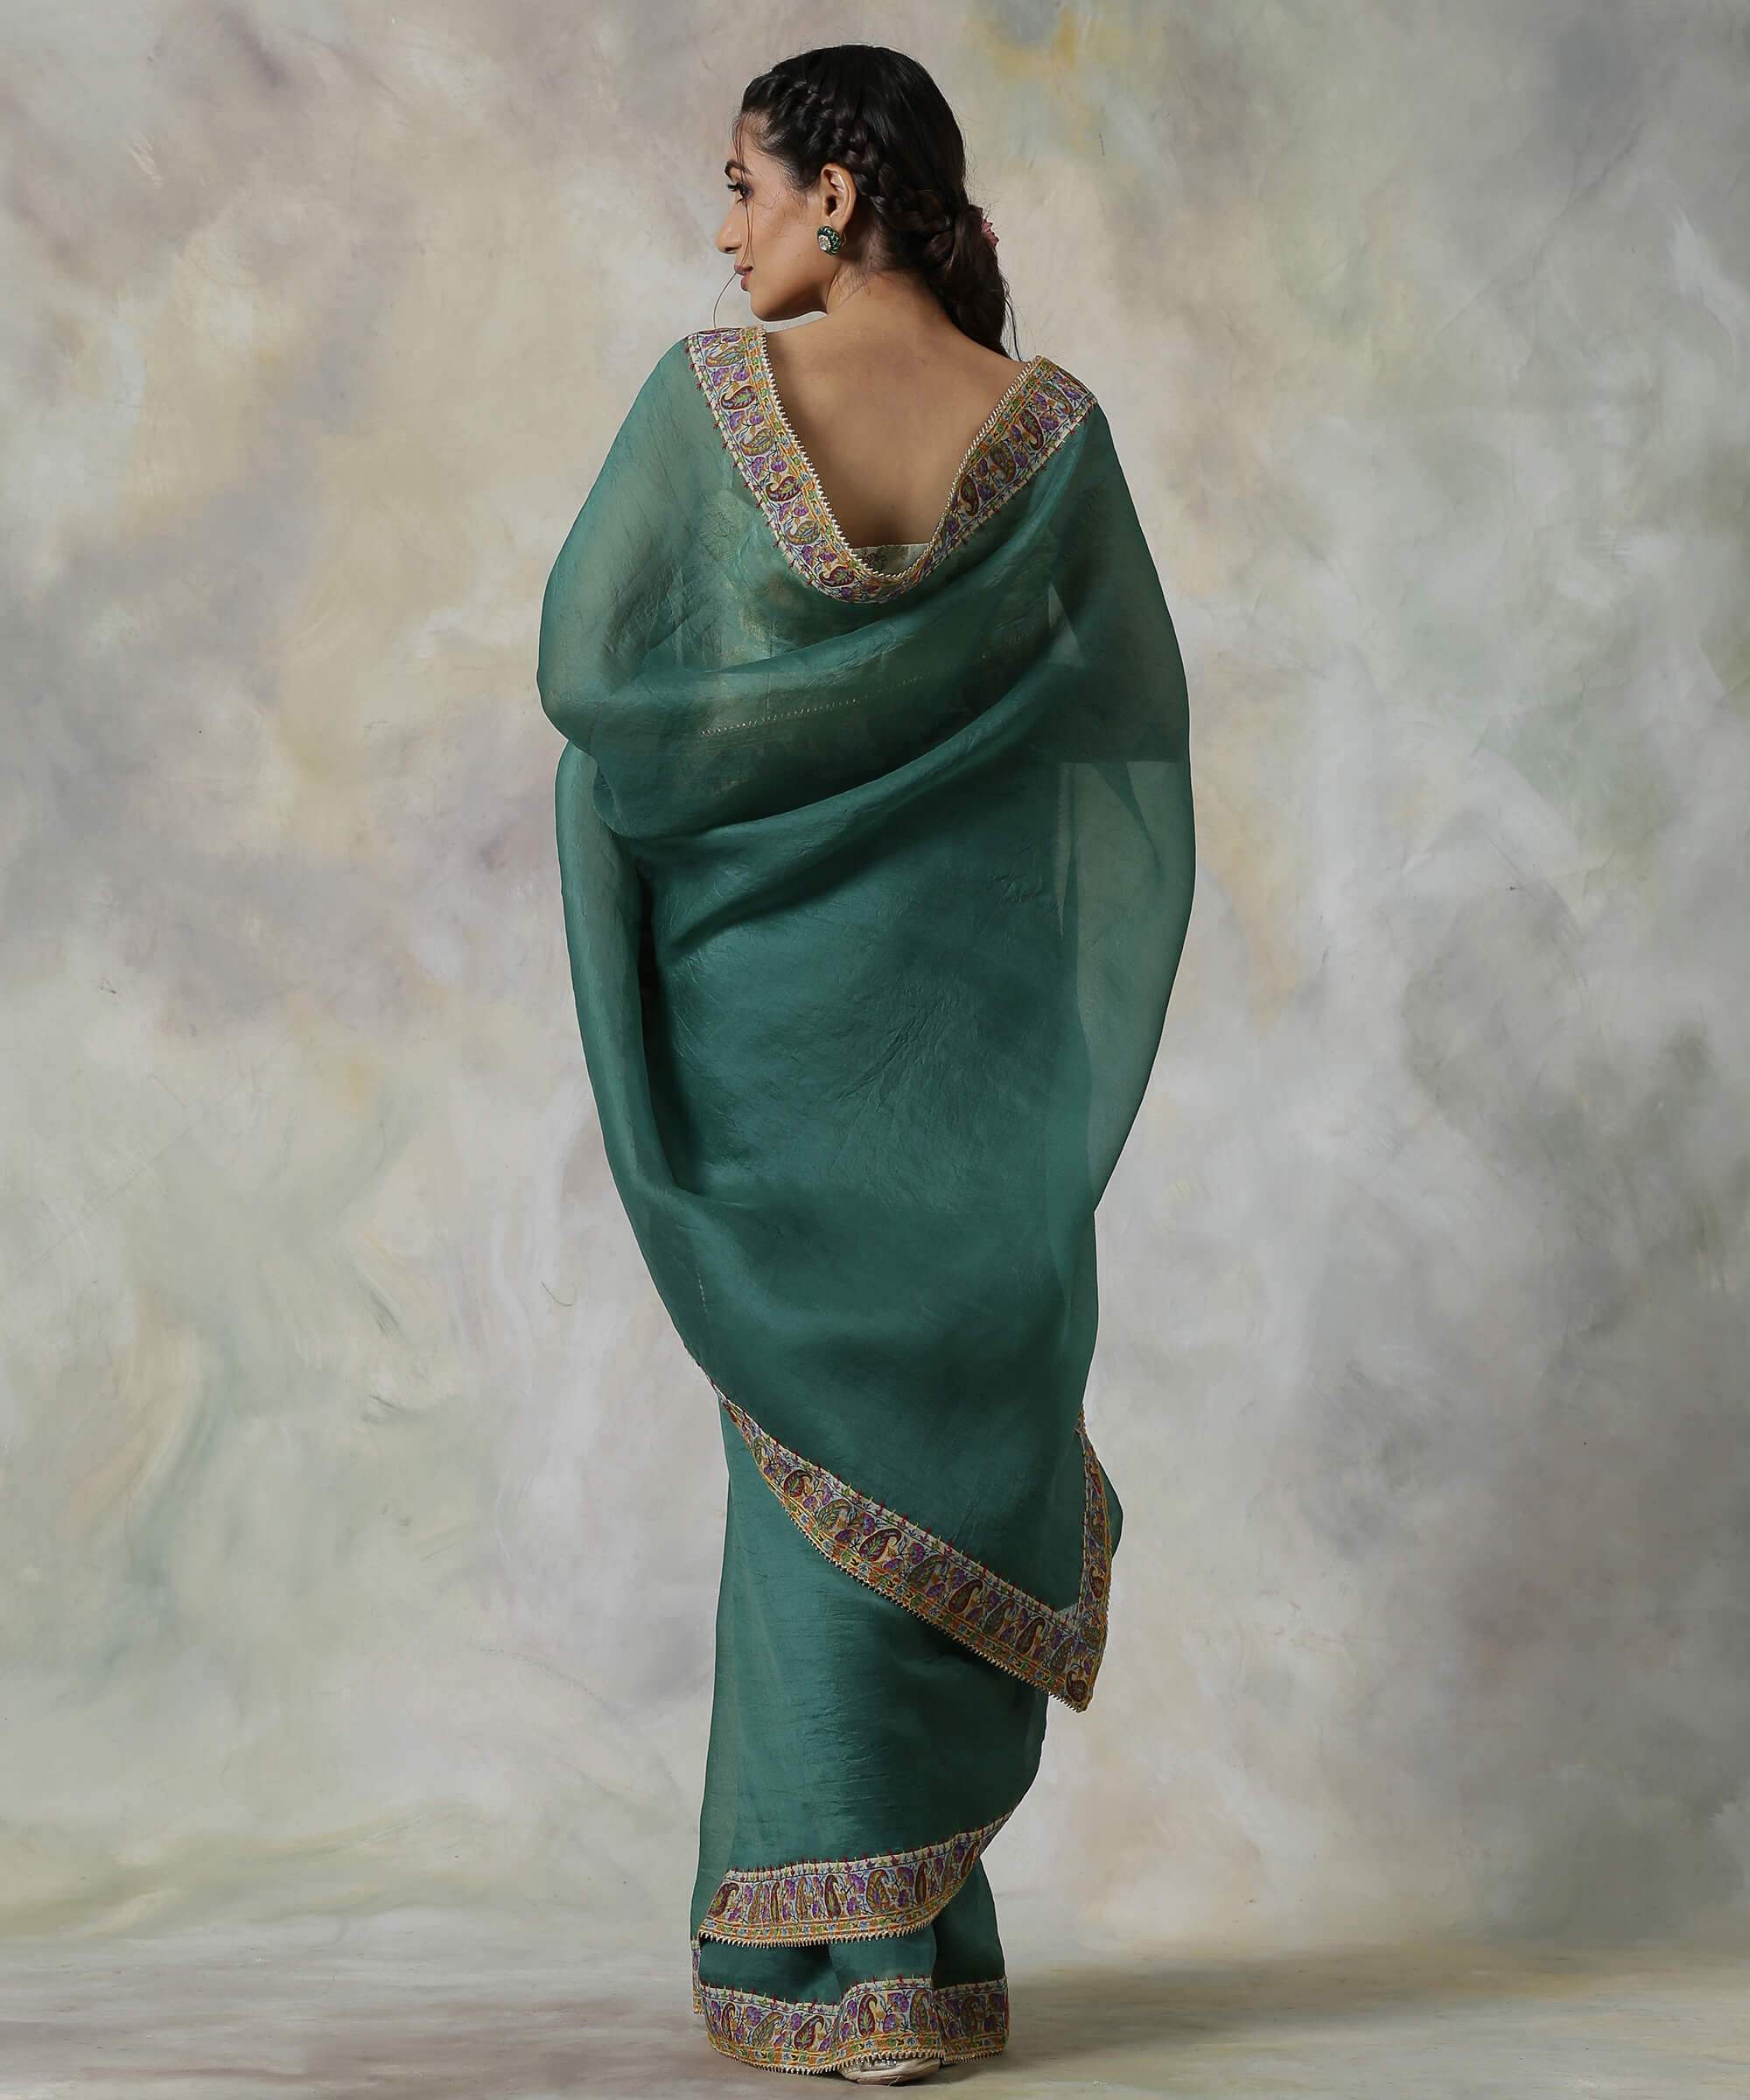 Persian_Green_Organza_Saree_With_with_Hand_Appliqued_Sozni_Needle_Work_Border_WeaverStory_03